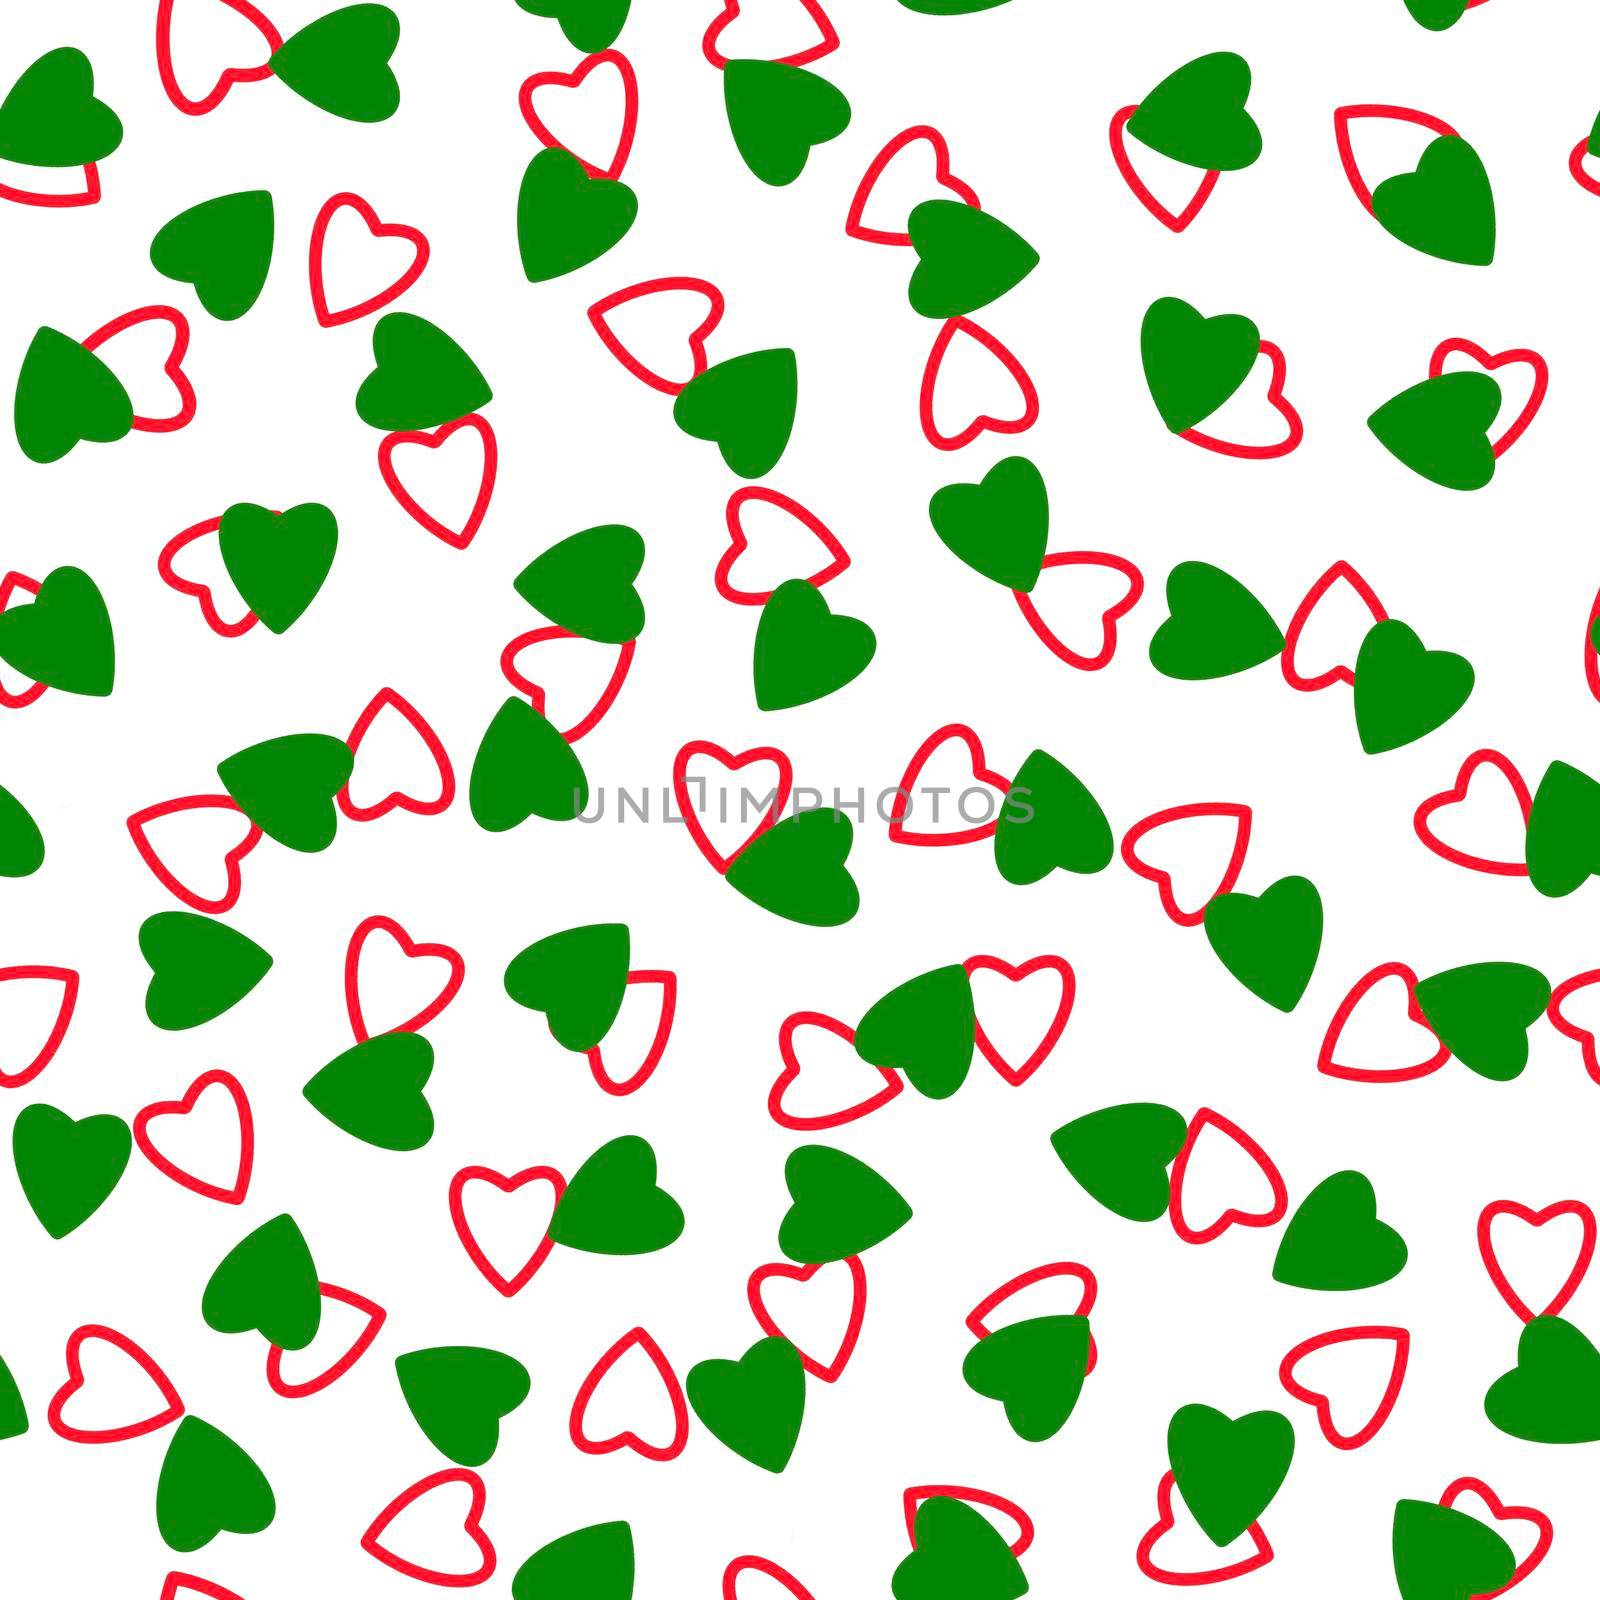 Simple hearts seamless pattern,endless chaotic texture made of tiny heart silhouettes.Valentines,mothers day background.Great for Easter,wedding,scrapbook,gift wrapping paper,textiles.Green,red,white.